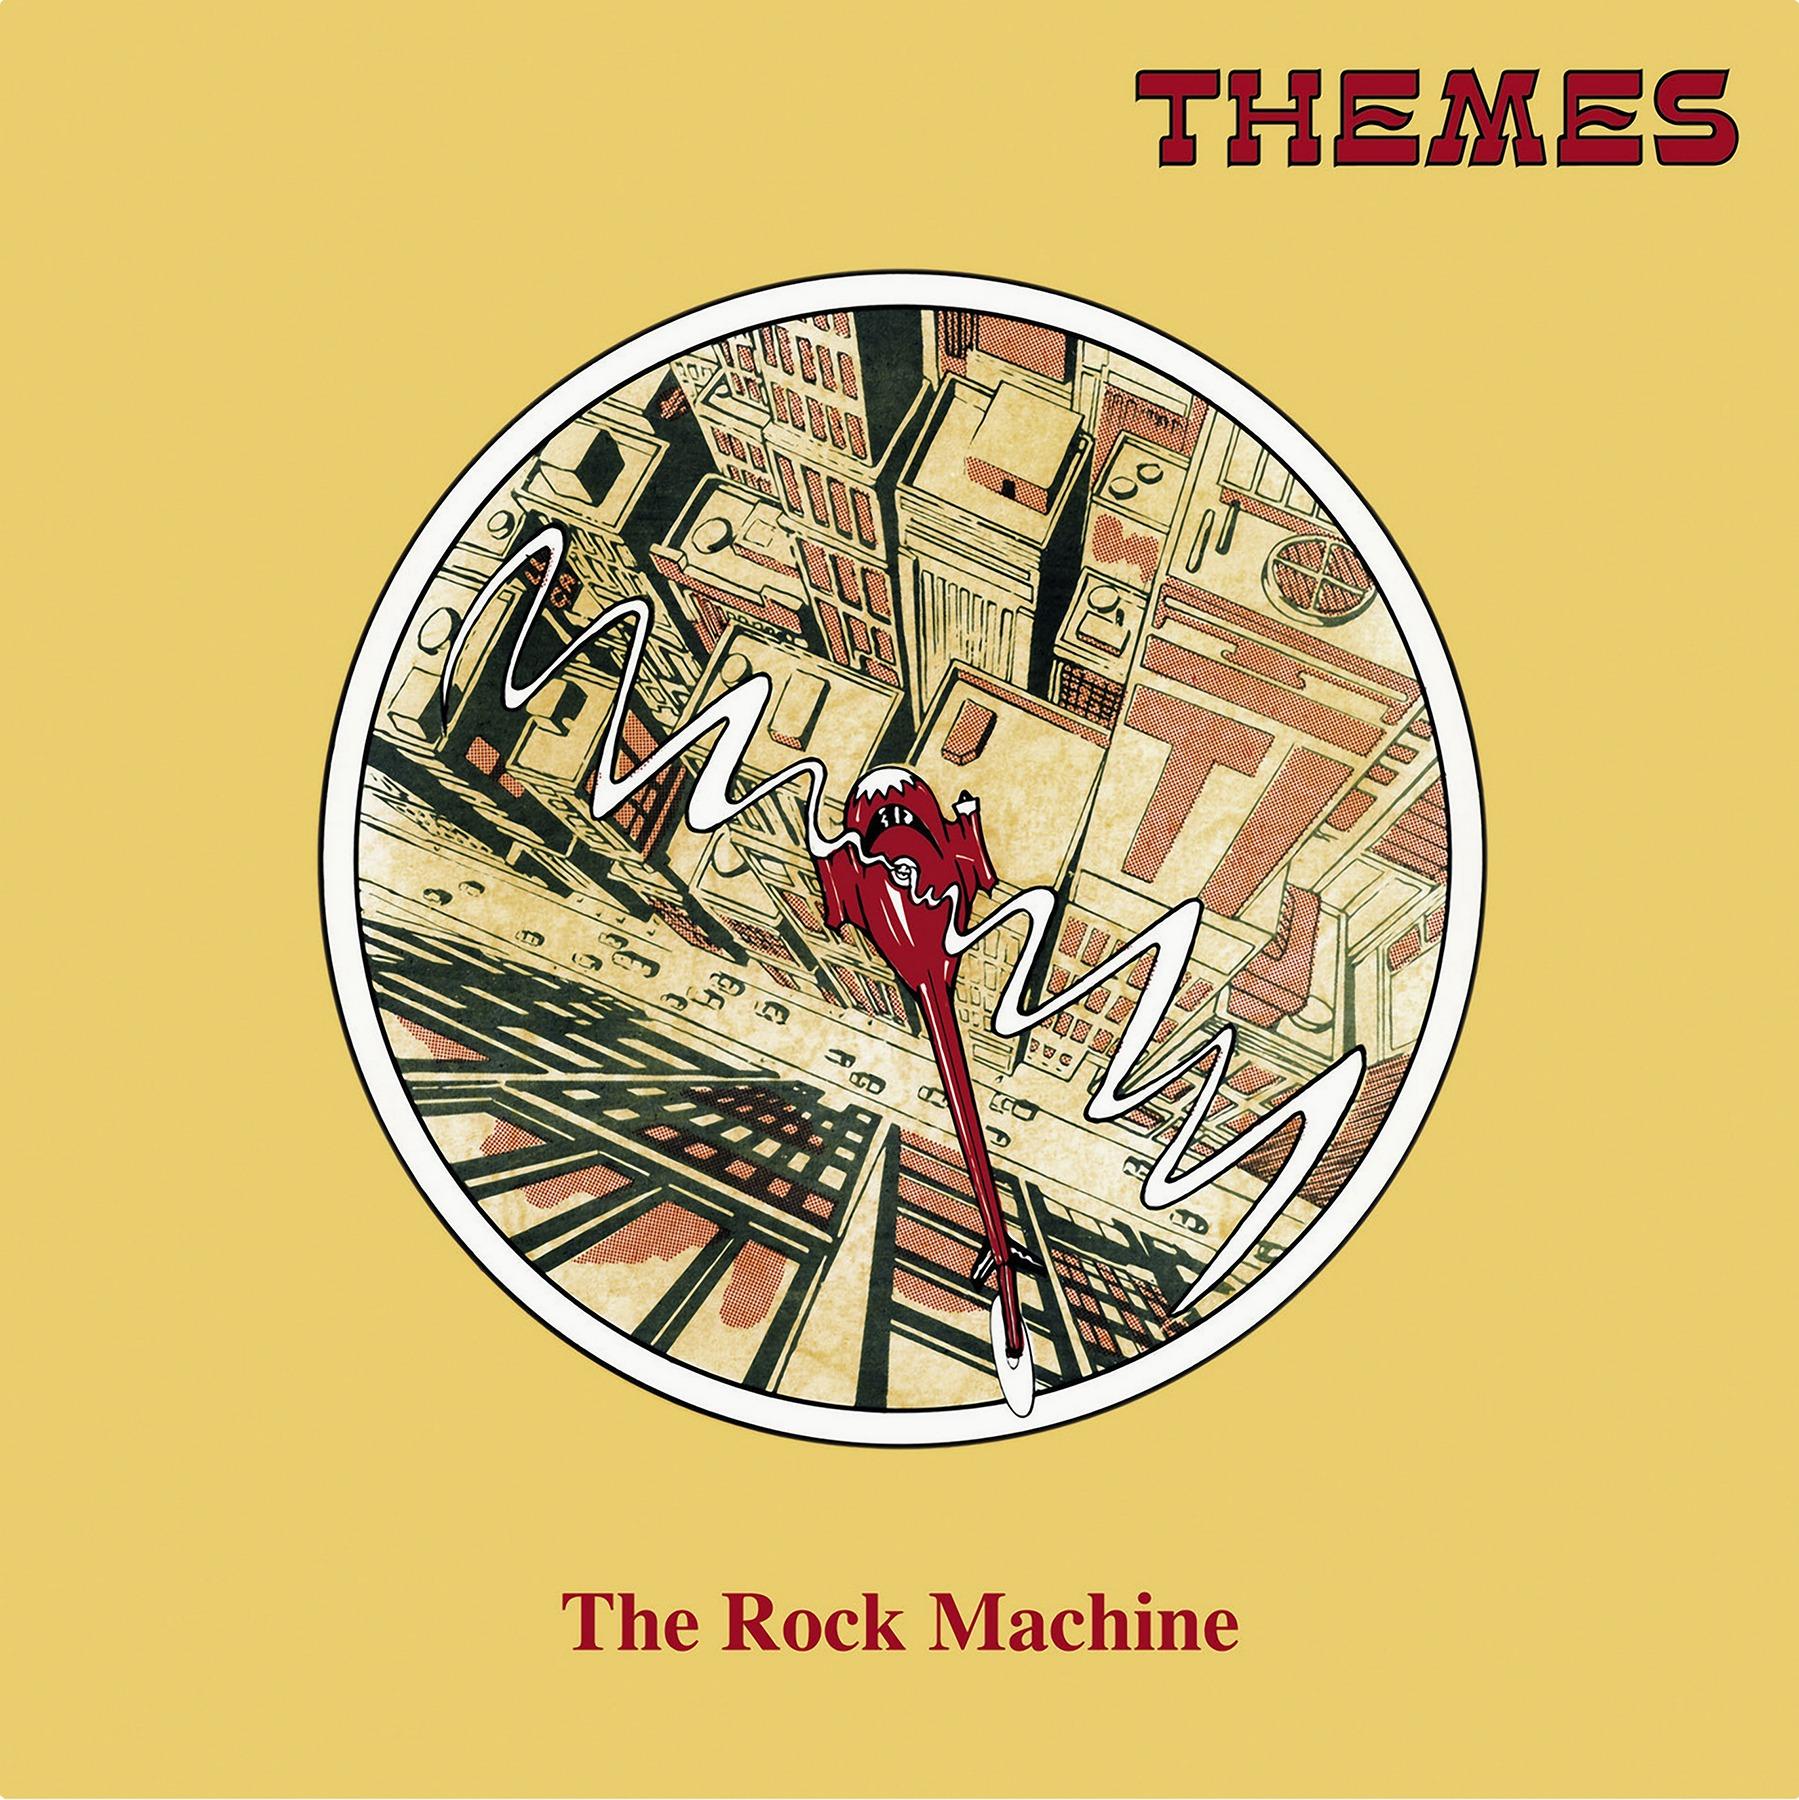 “The Rock Machine,” a 1973 record by Alan Hawkshaw & Alan Parker for the British library Themes International.